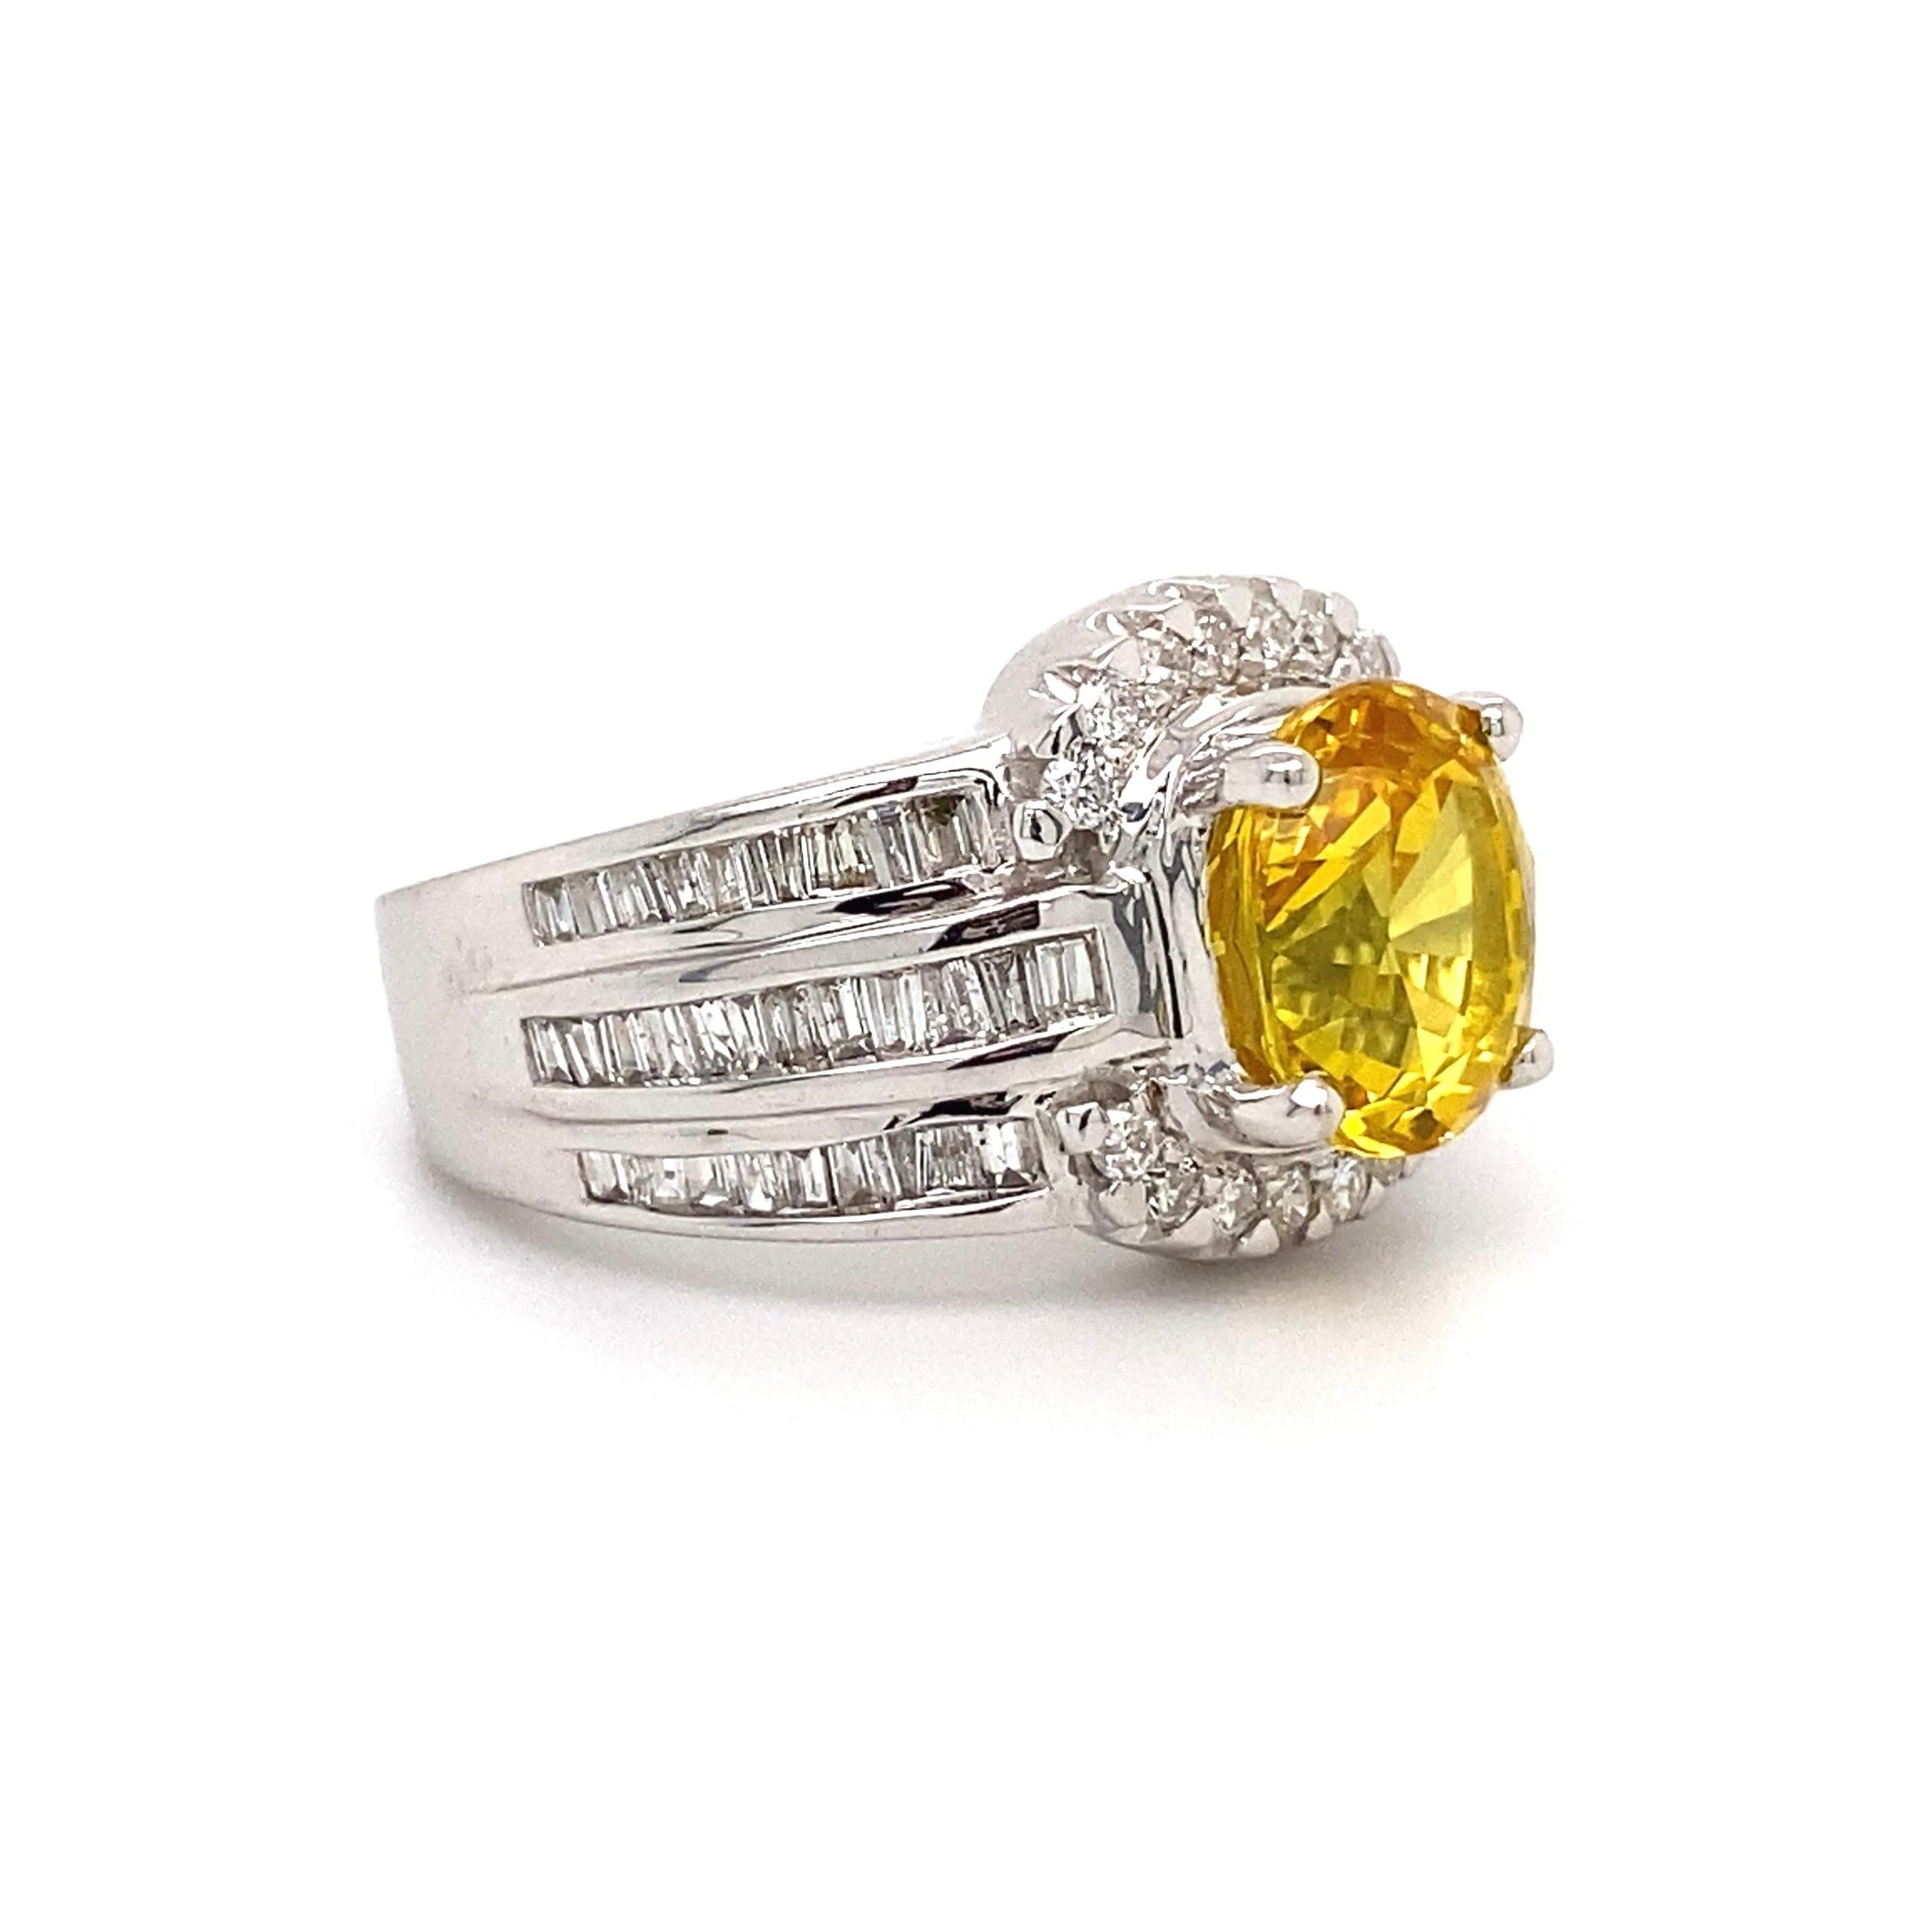 Simply Beautiful! Finely detailed Yellow Sapphire GIA and Diamond Gold Show Stopper Ring. Centering a securely nestled  3.50 Carat diffused Yellow Sapphire GIA. Surrounded by Diamonds, weighing approx. 0.80tcw. Hand crafted 14K white Gold mounting.